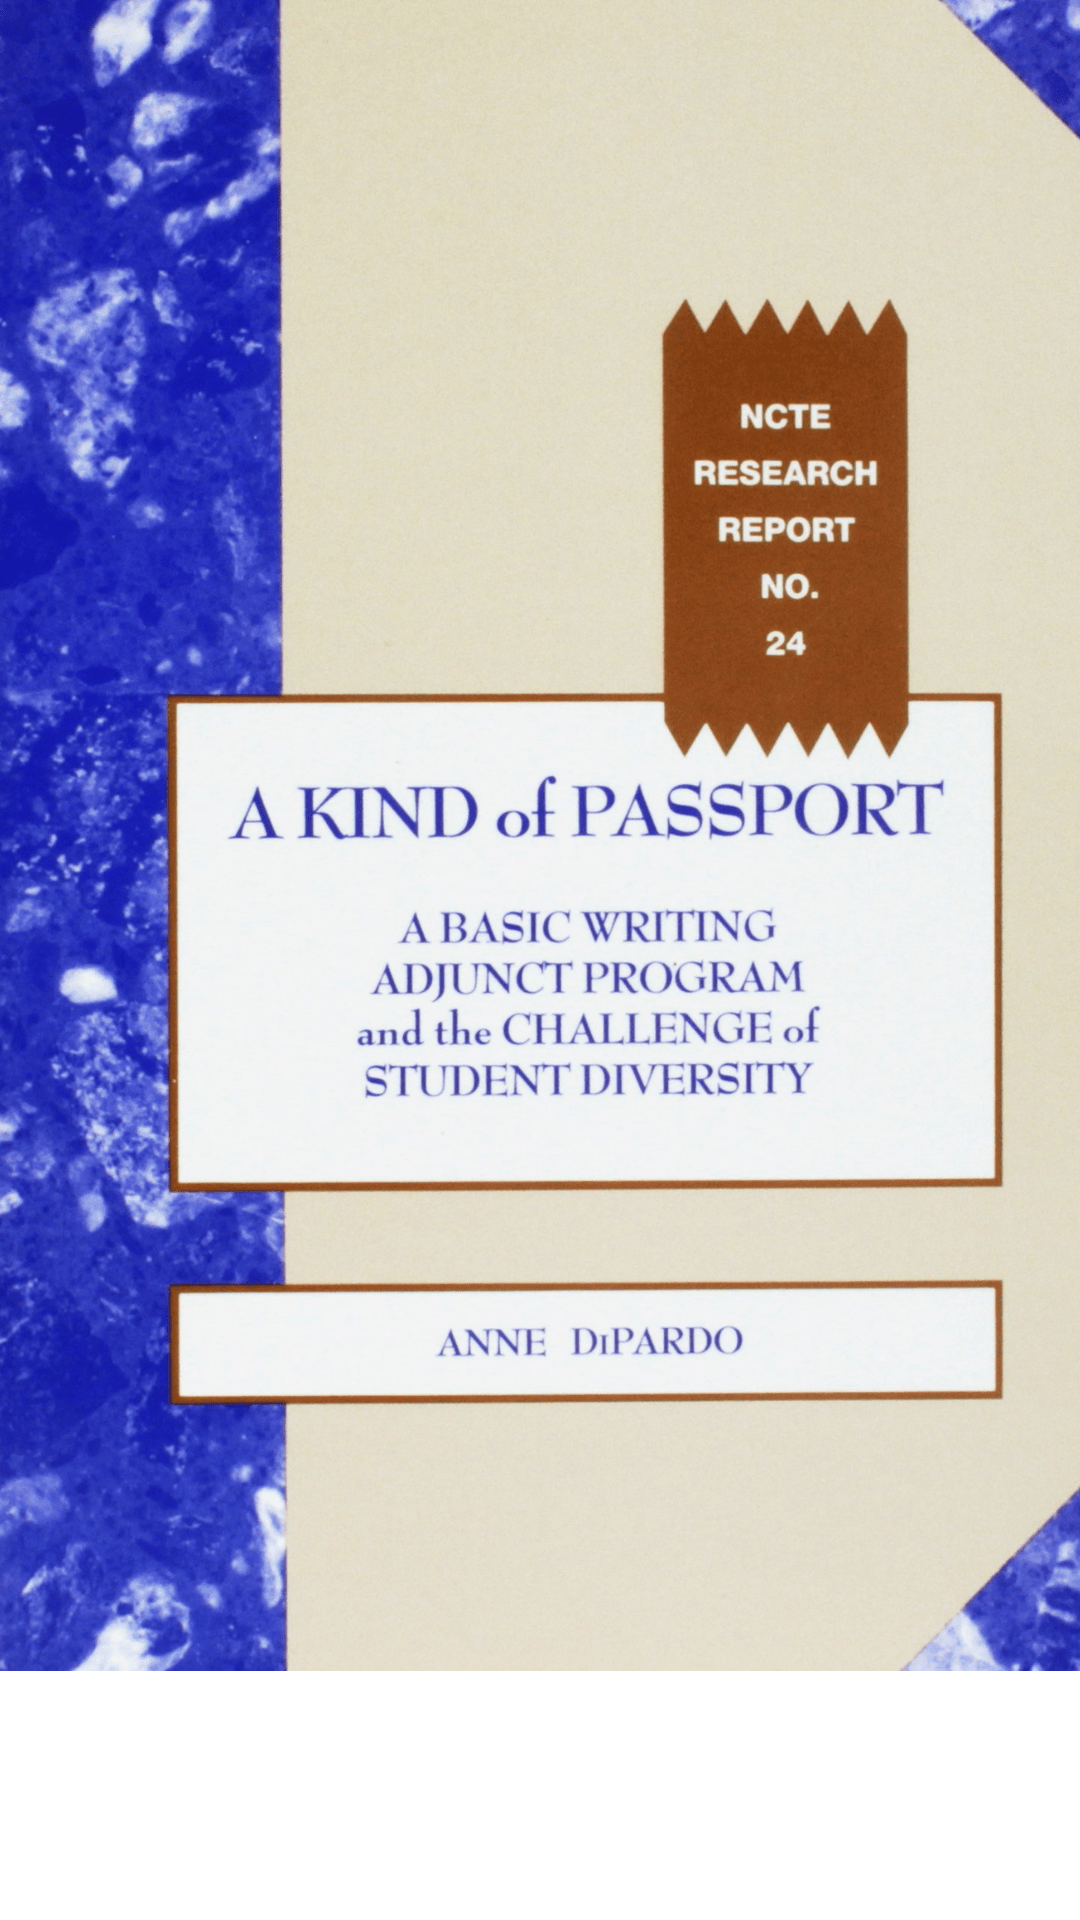 A Kind of Passport: A Basic Writing Adjunct Program and the Challenge of Student Diversity